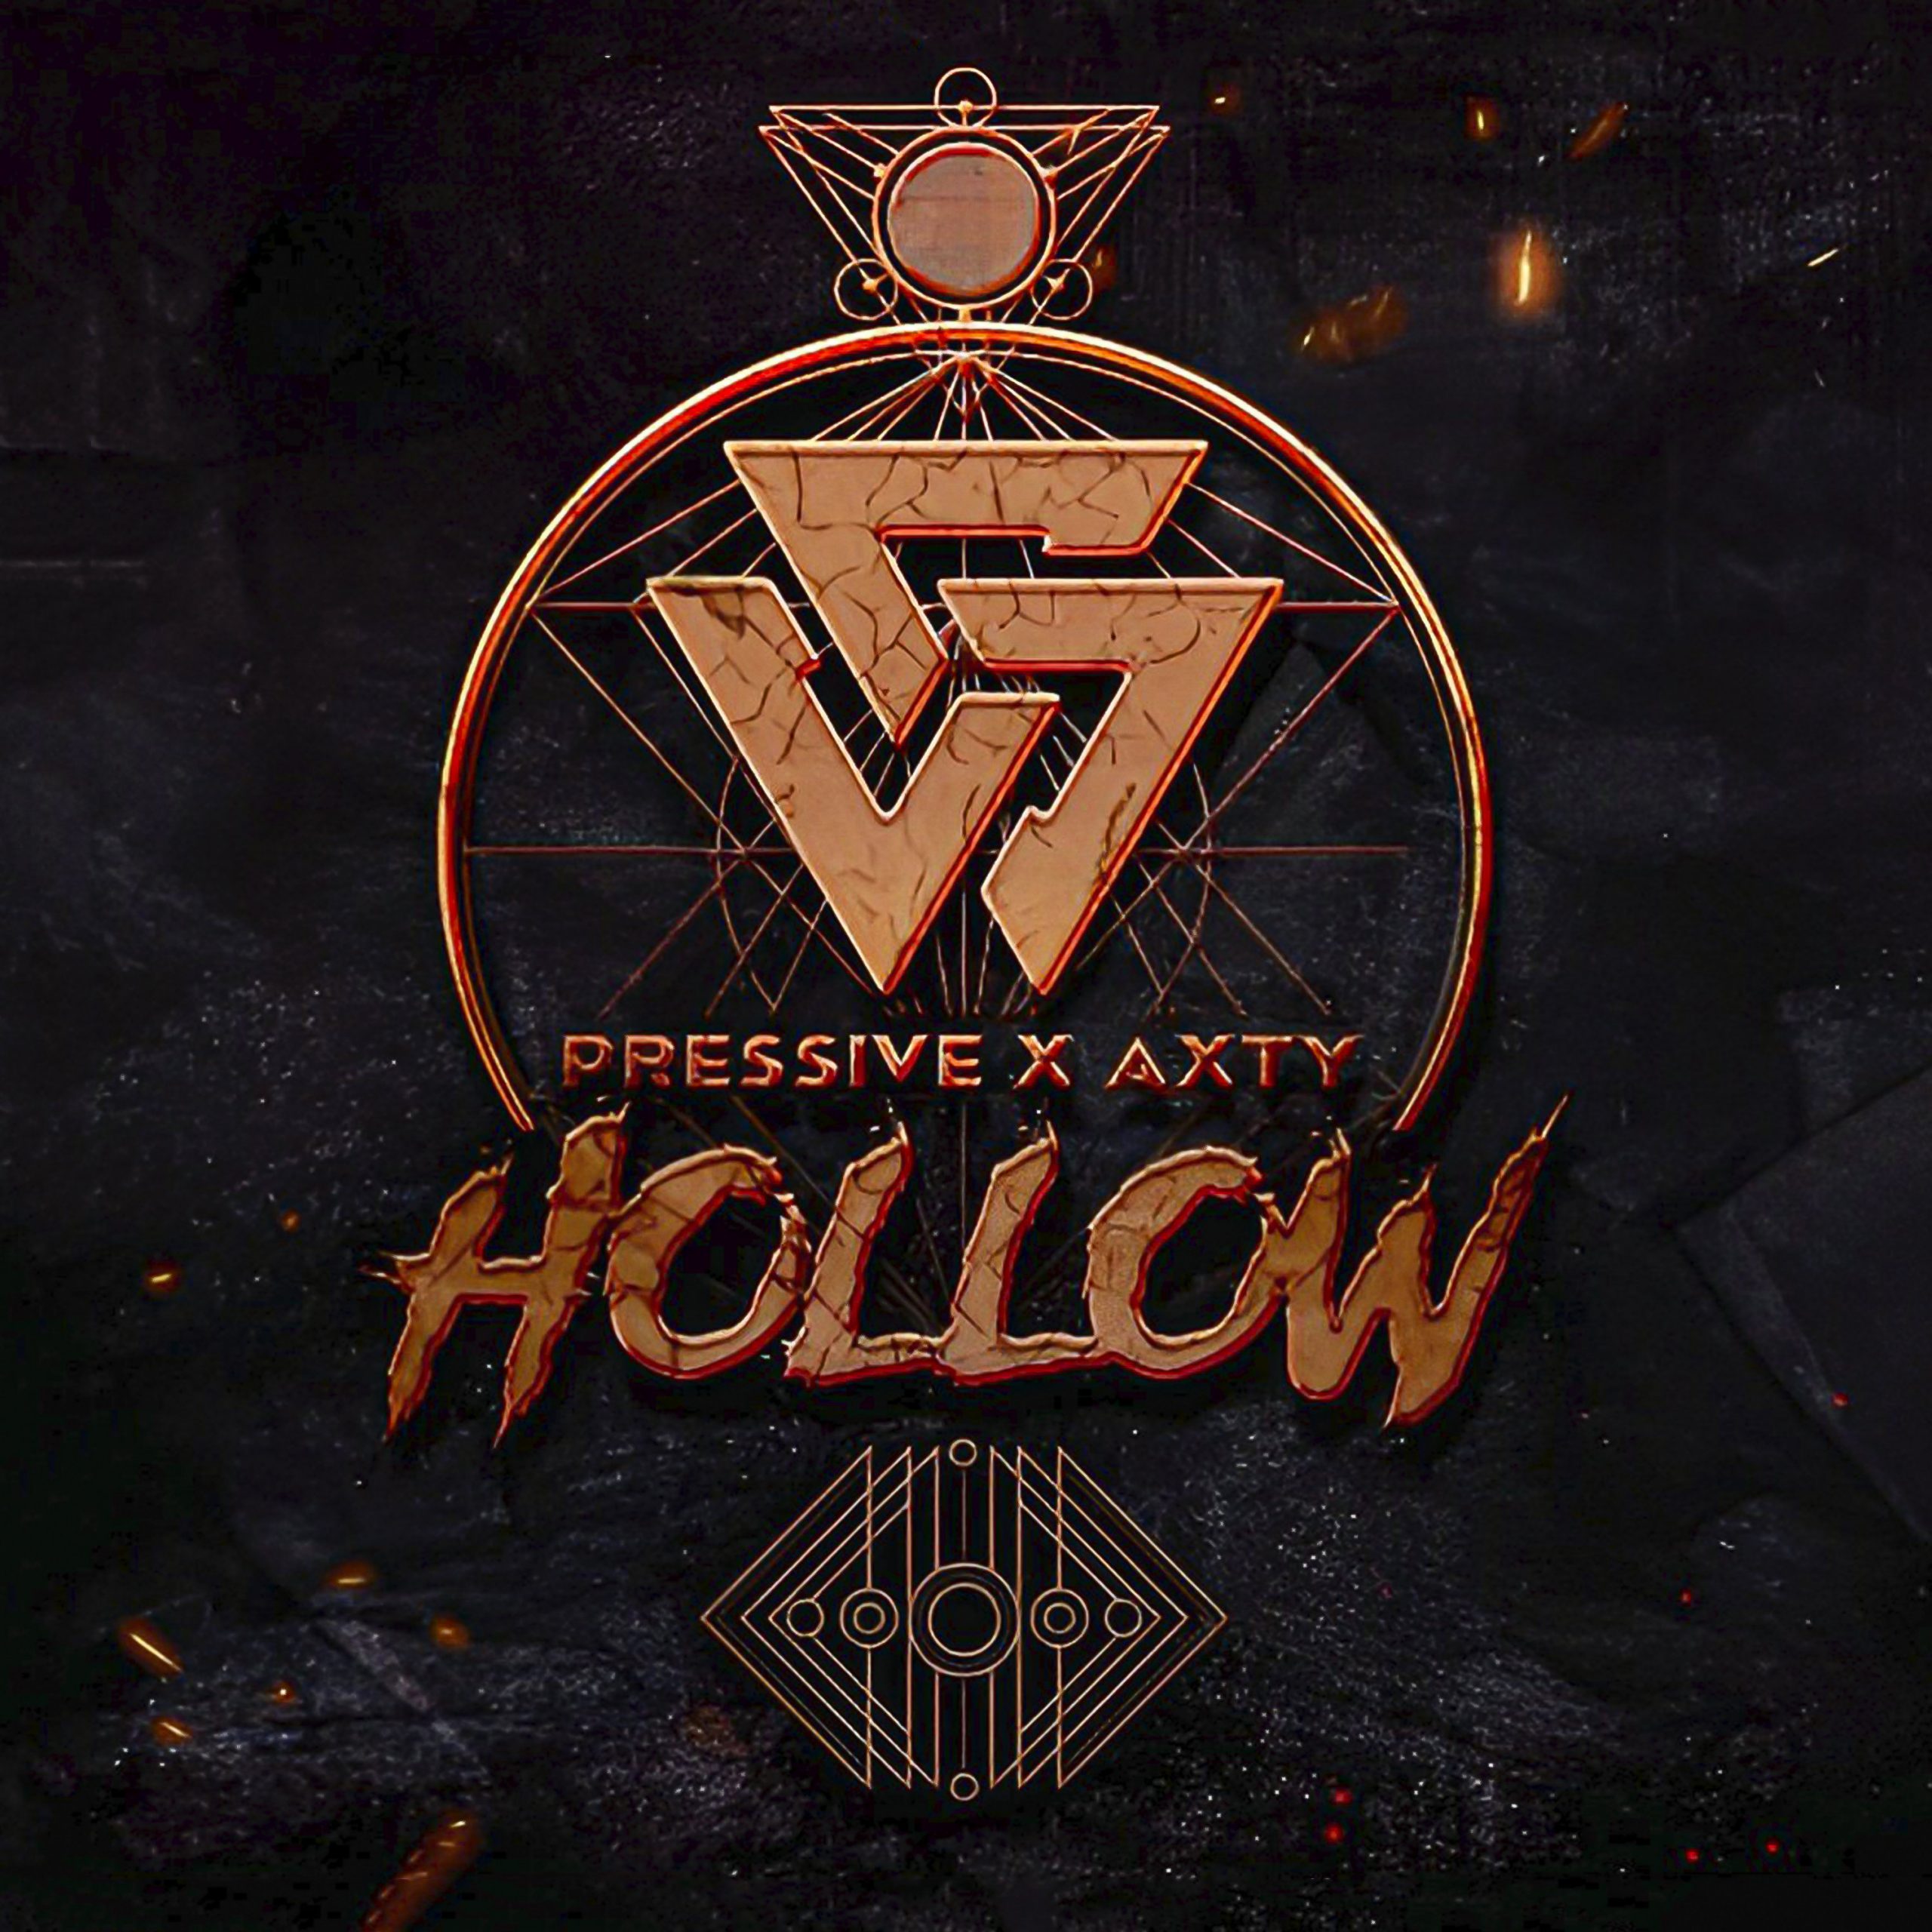 ‘Pressive’ and ‘AXTY’ are artists who stand out for their quality and artistic vision on new single ‘Hollow’.